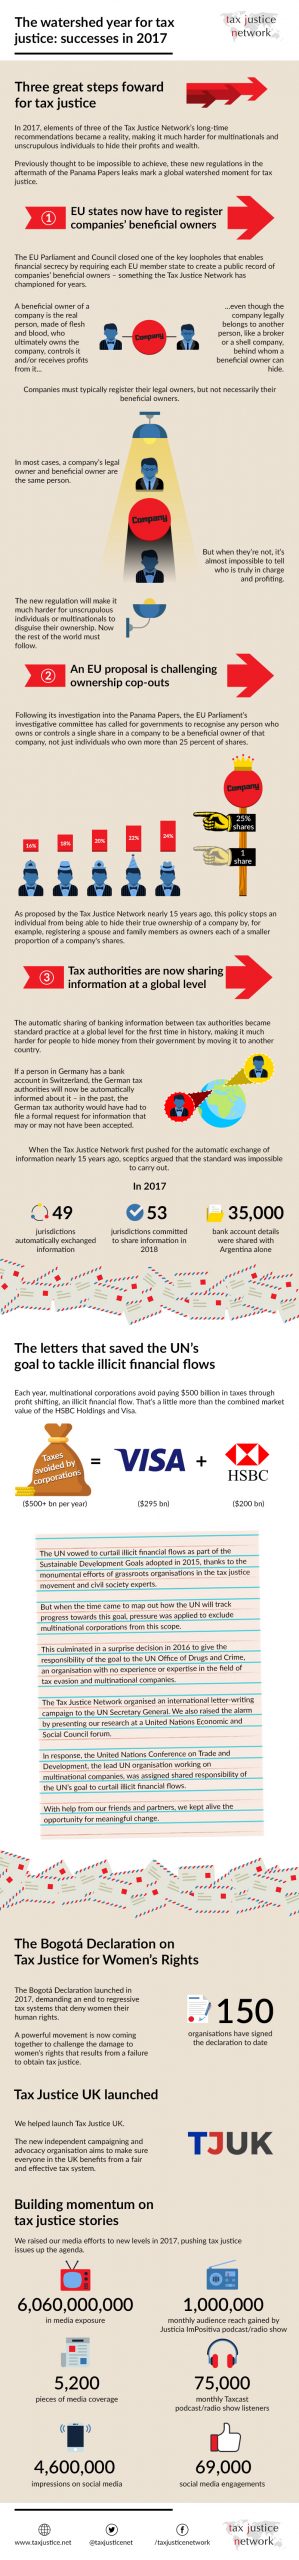 An infographic visualising tax justice successes in 2017